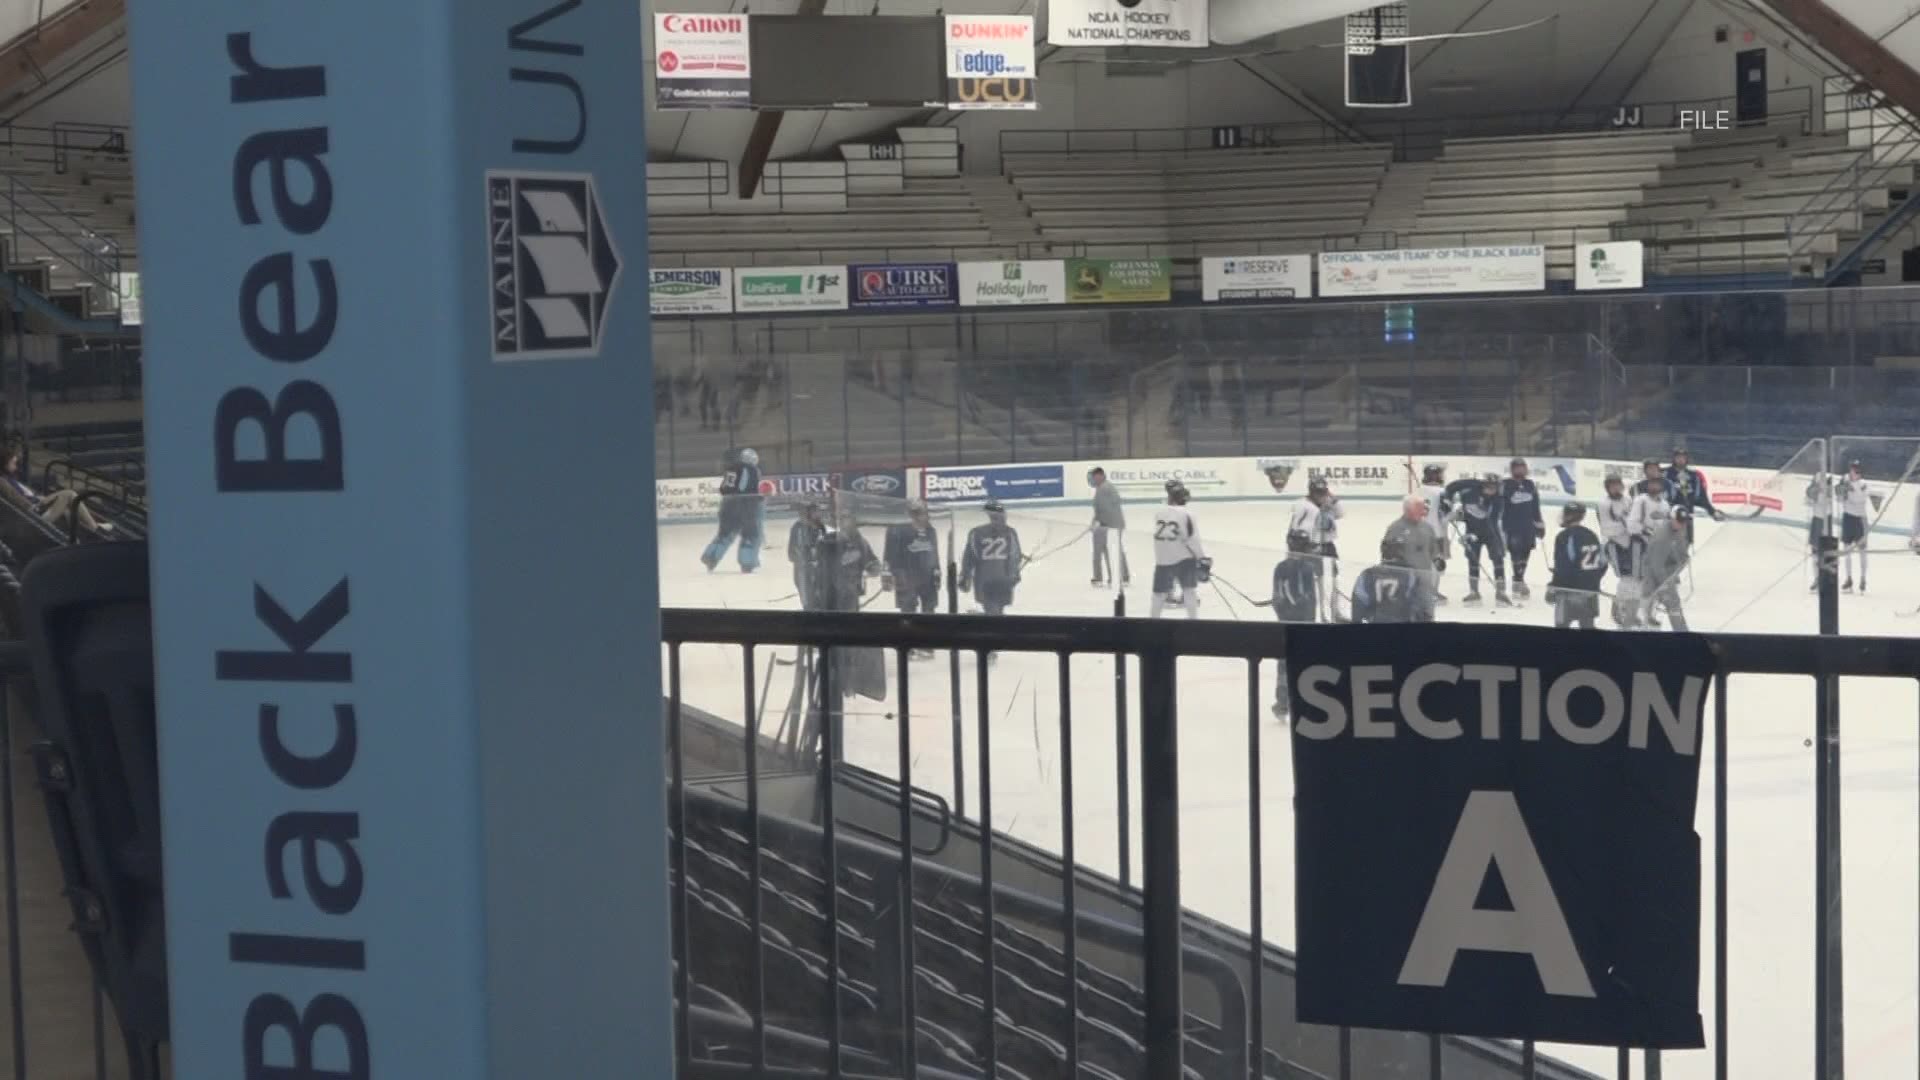 After quarantining for two weeks The University of Maine's Men's Ice Hockey team is hitting the ice this weekend against the University of Massachusetts-Lowell.